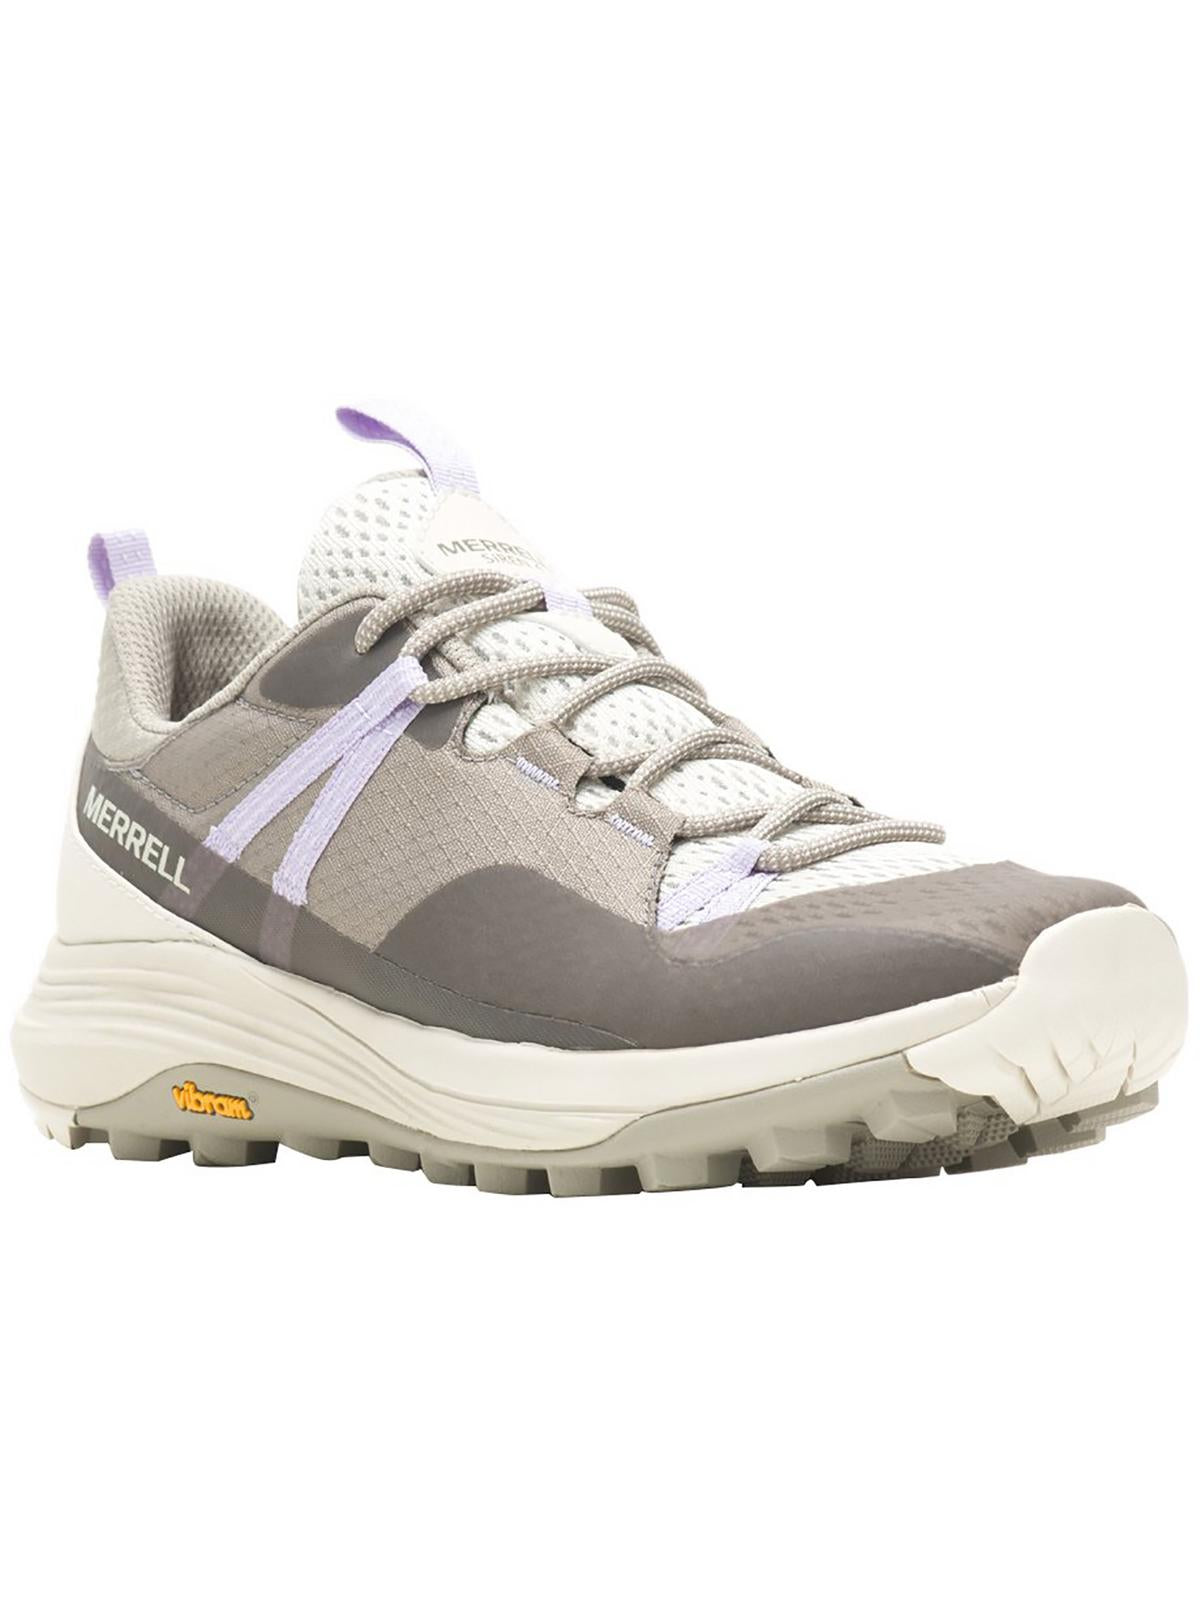 Merrell Siren 4 Womens Fitness Workout Running & Training Shoes In Gray